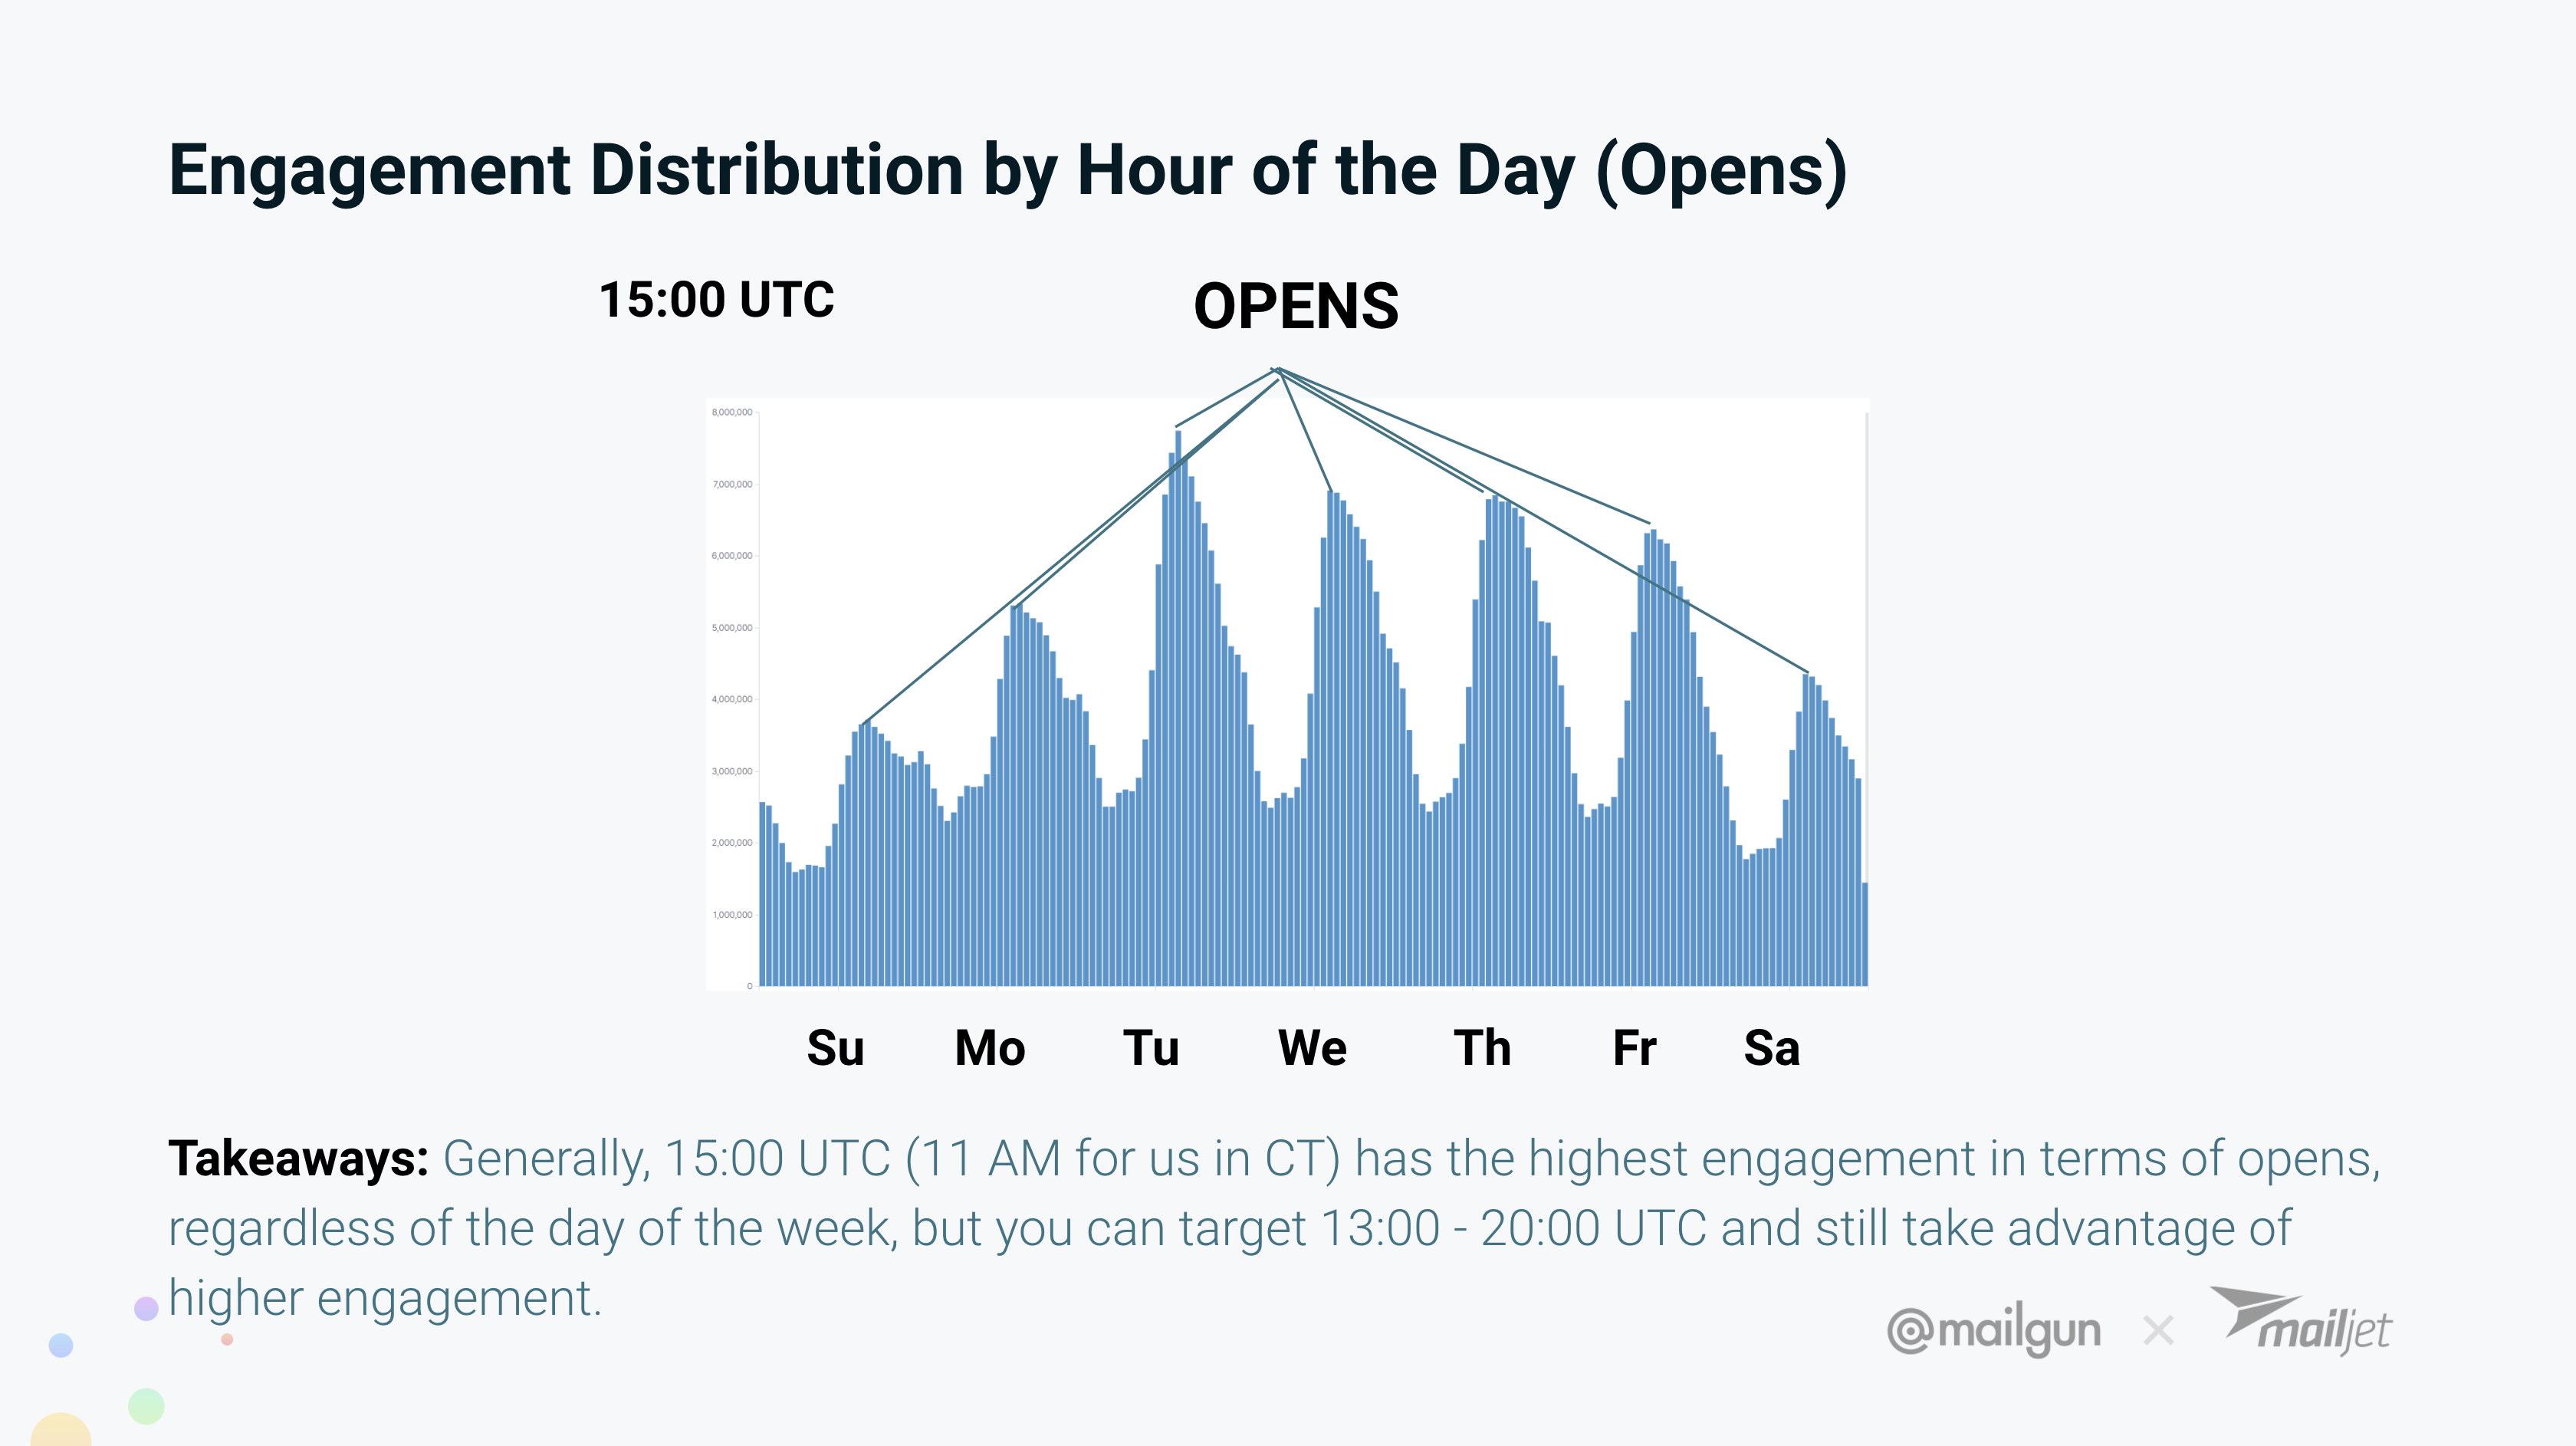 Engagement graph showing opens throughout the day